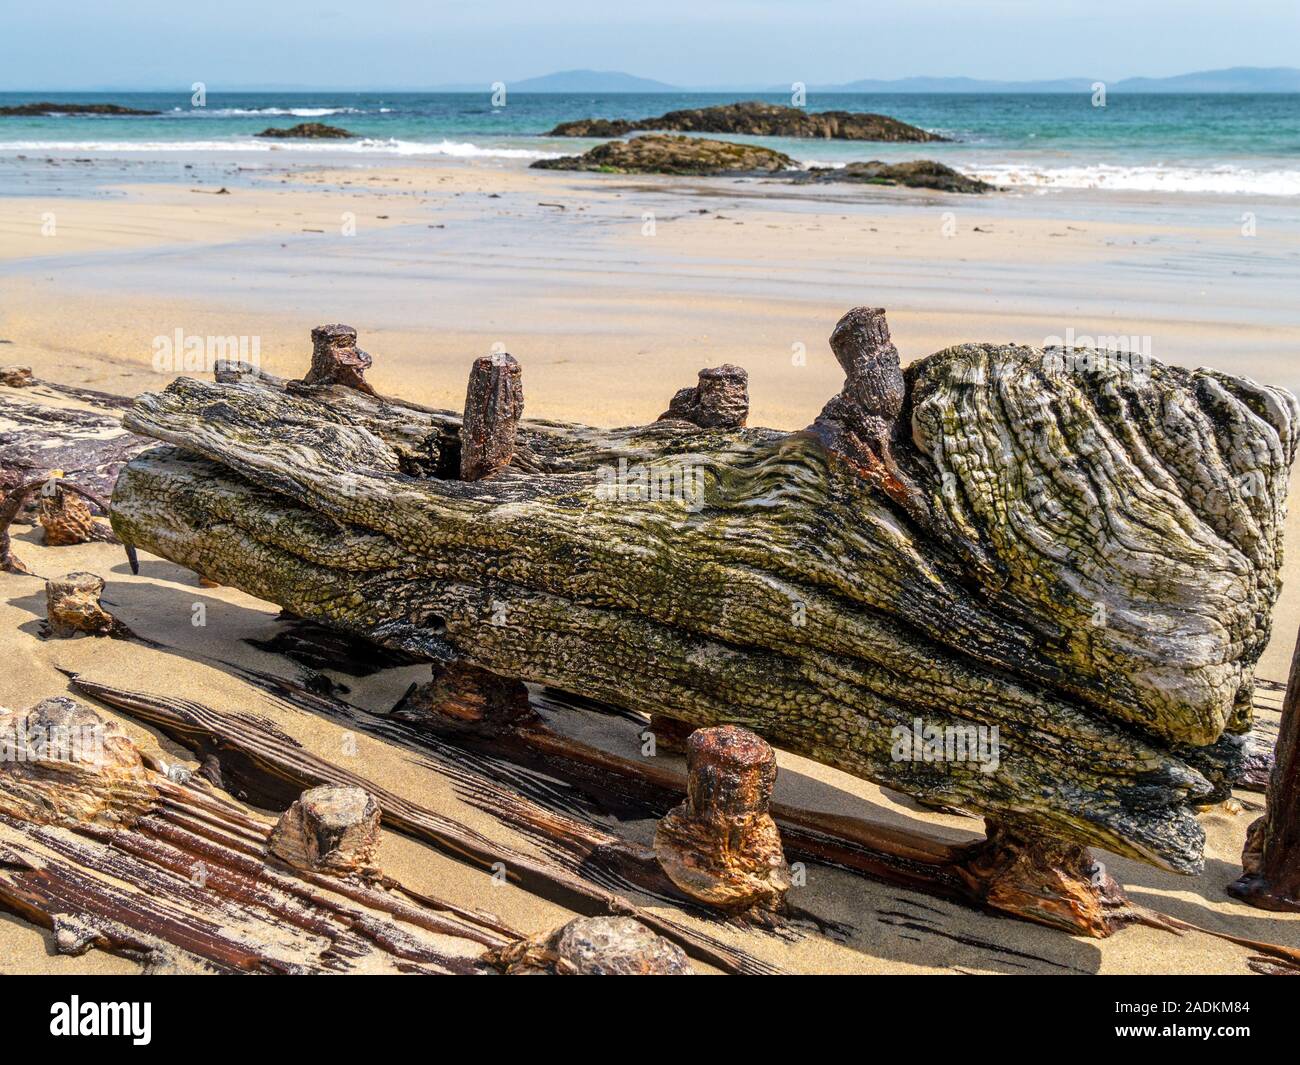 Detail of old shipwrecked wooden ship's timbers and nails buried in the sand of Balnahard beach, Isle of Colonsay in the Inner Hebrides, Scotland, UK Stock Photo